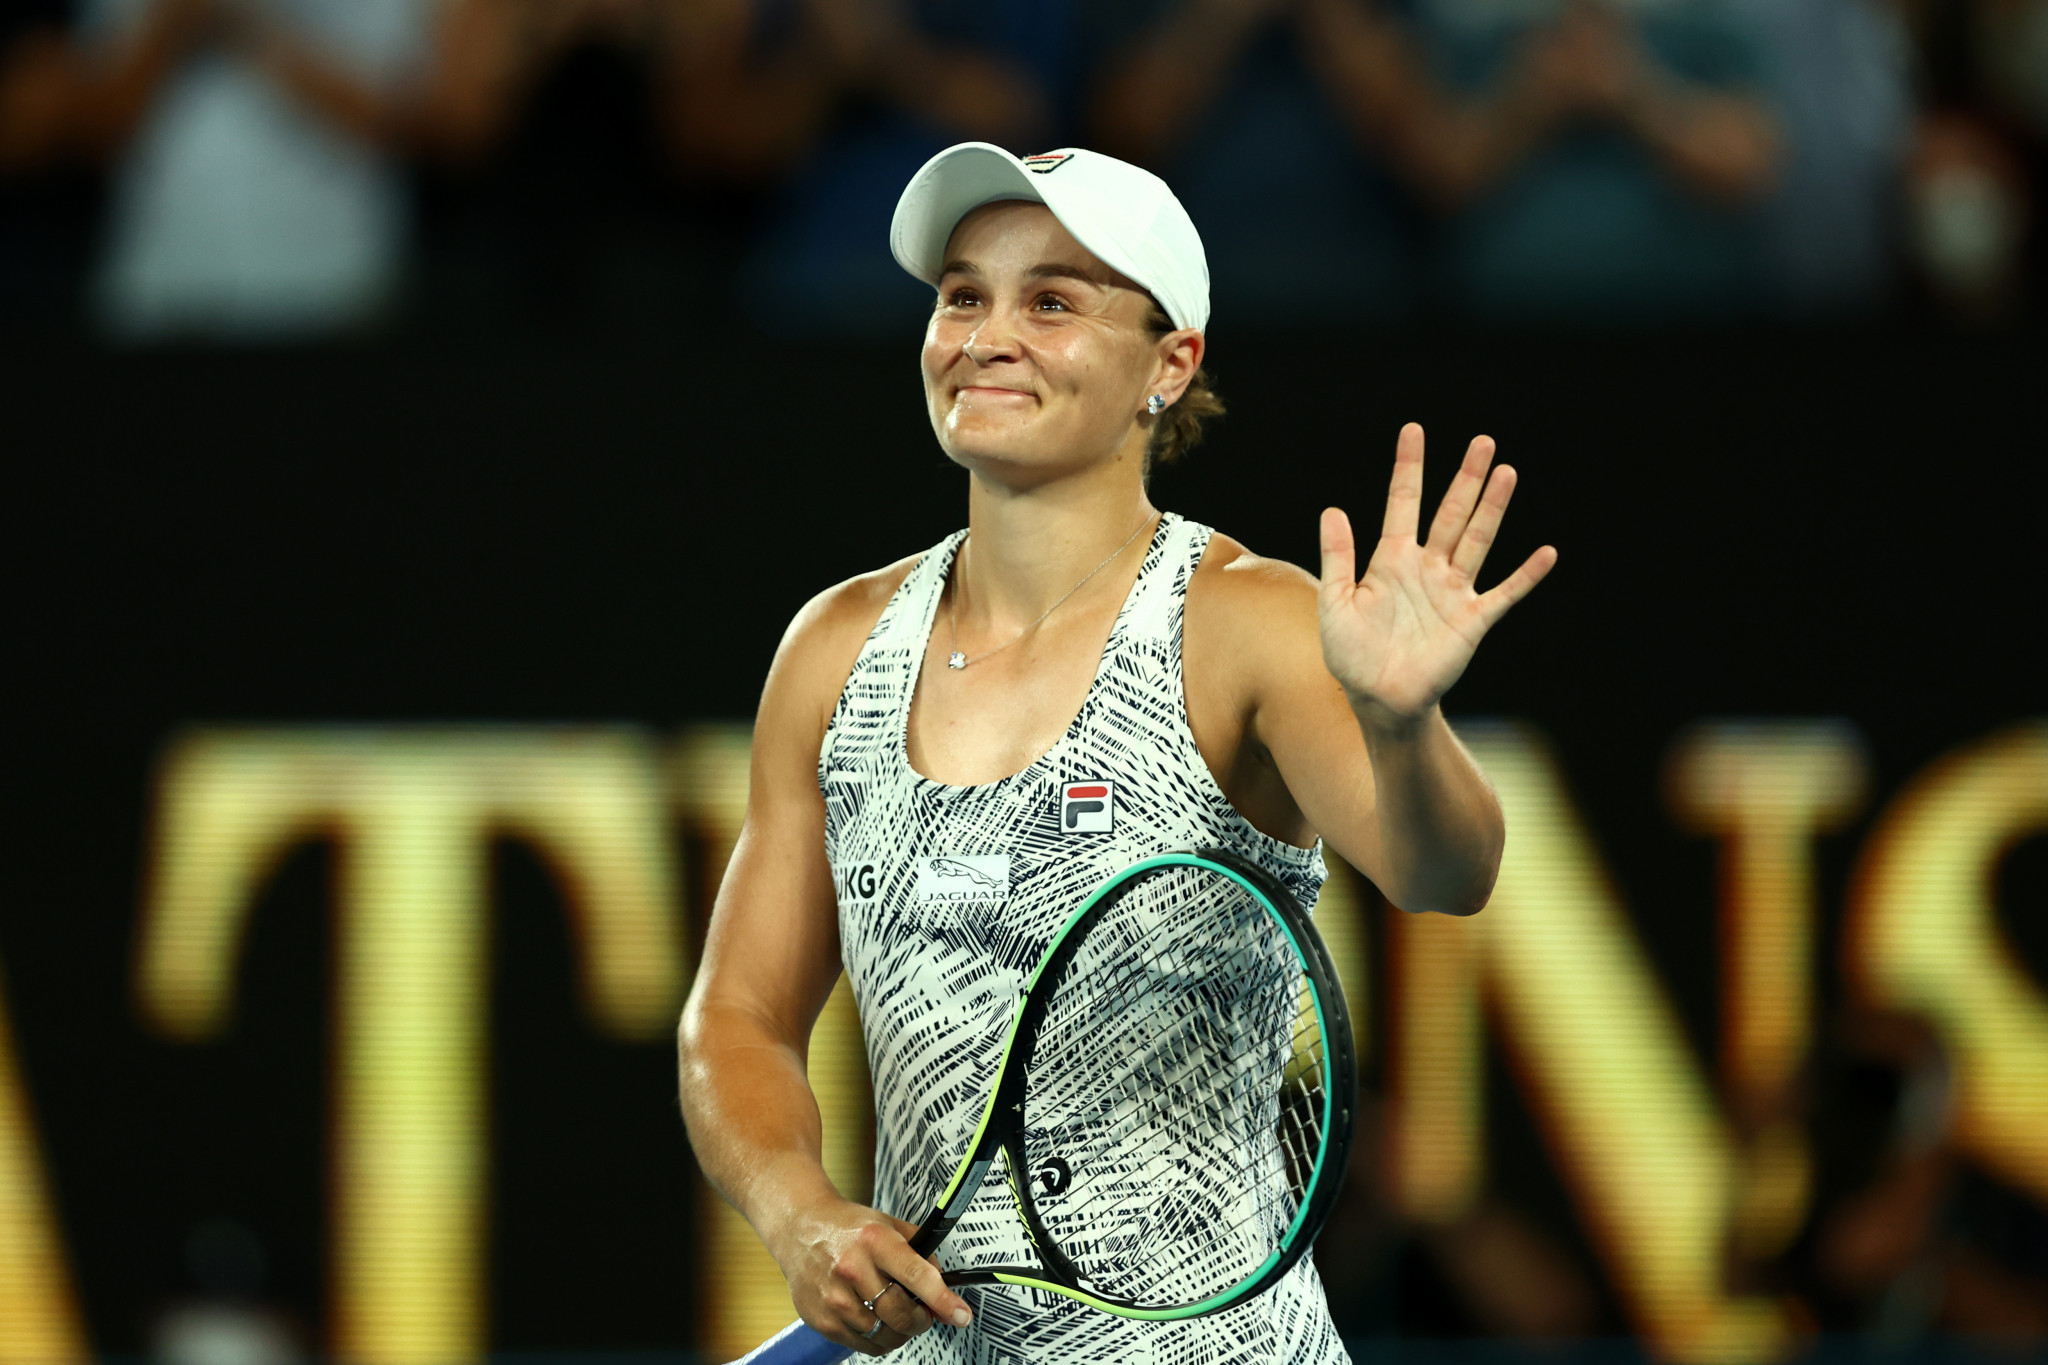 Australian Ashleigh Barty reached the women's singles final of the Australian Open in Melbourne without dropping a set ©Getty Images